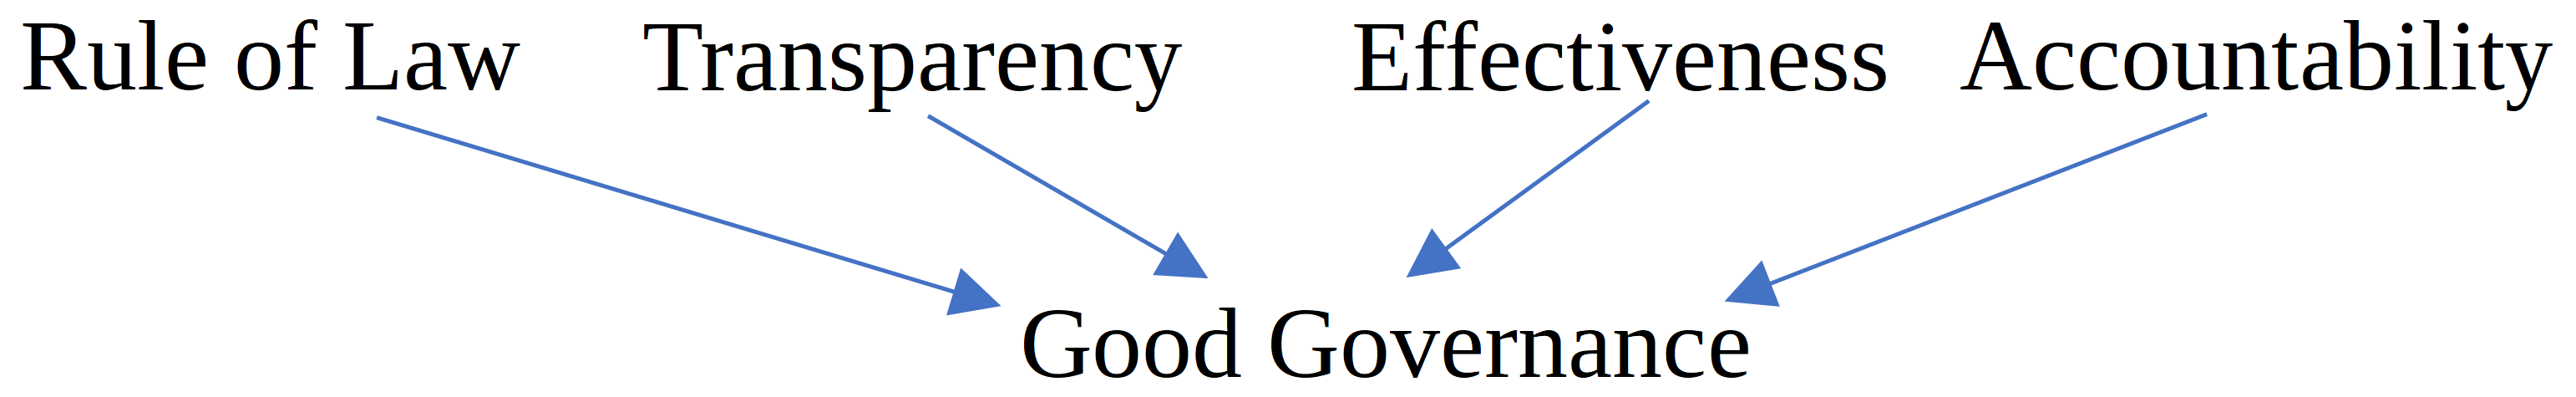 These four attributes cover the dimensions of the state’s institutions and structures, decision-making processes, capacity to implement, and the relationship between government, officials and the public.